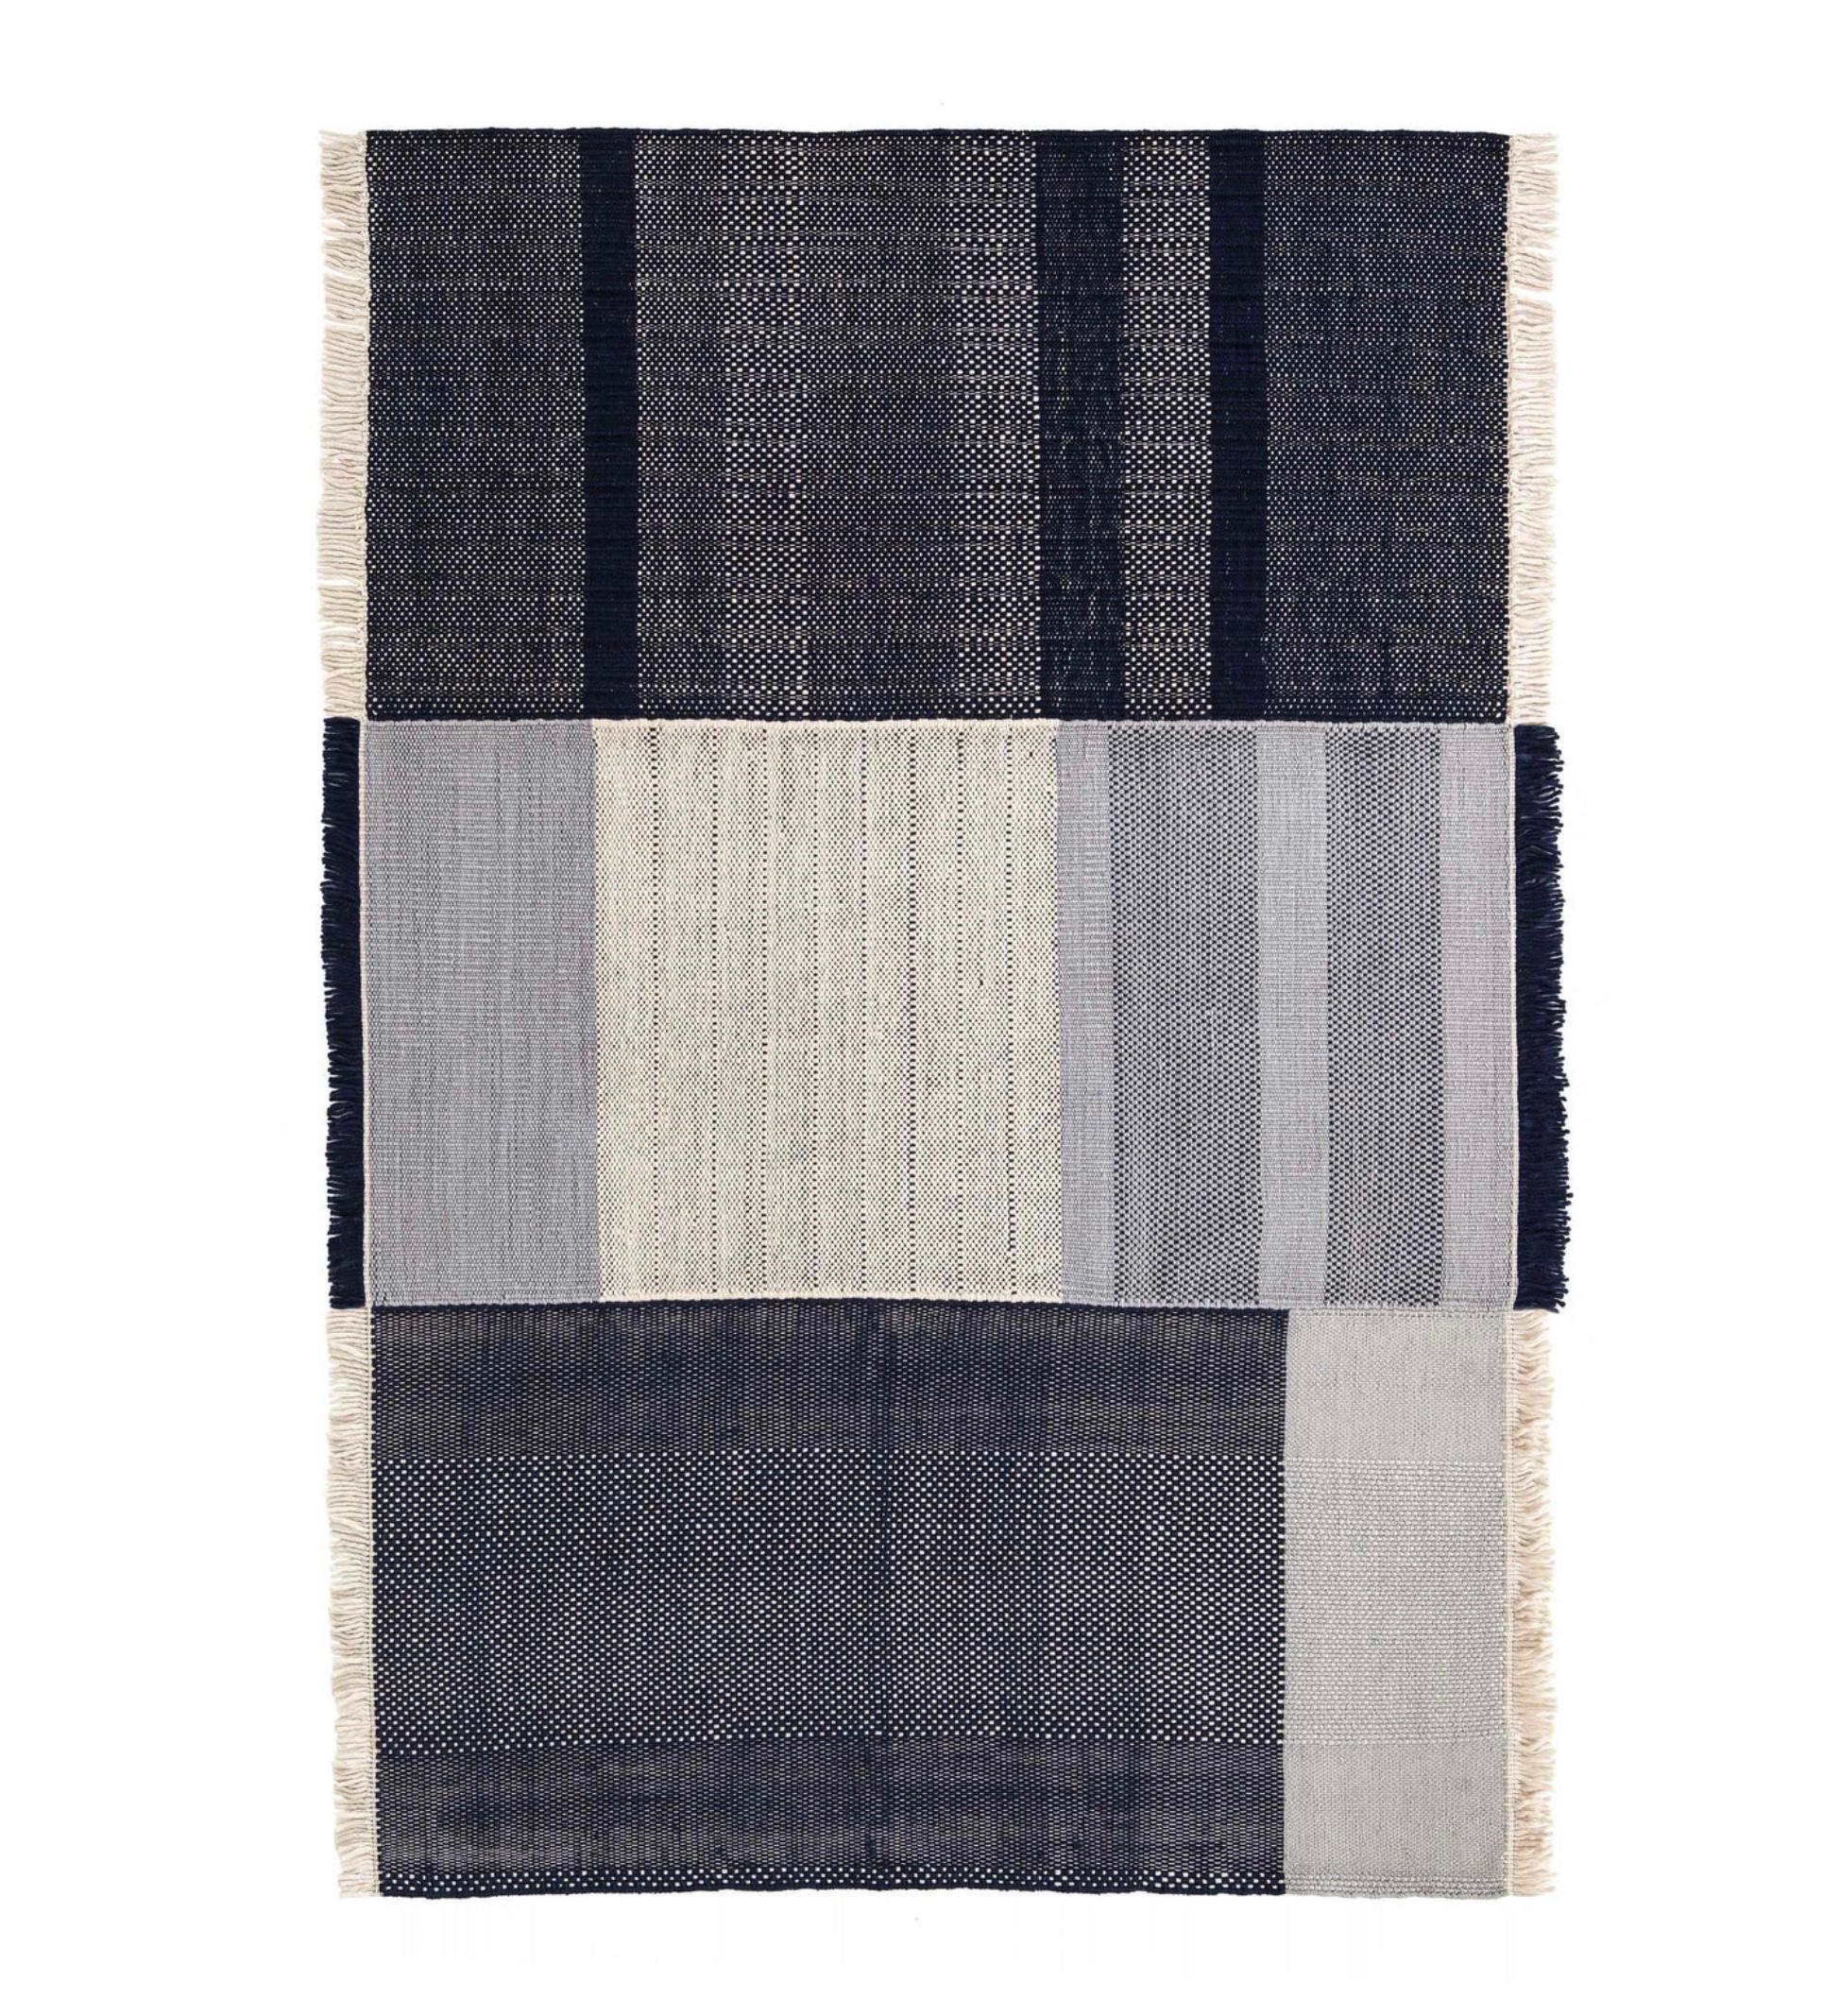 Nani Marquina & Elisa Padrón 'Tres' Outdoor rug 300x400cm. Current production, Spain. 

Tres Outdoor aims to transfer the warmth of the iconic Tres collection to the outdoor world. Made from 100% recycled PET, a material produced through the